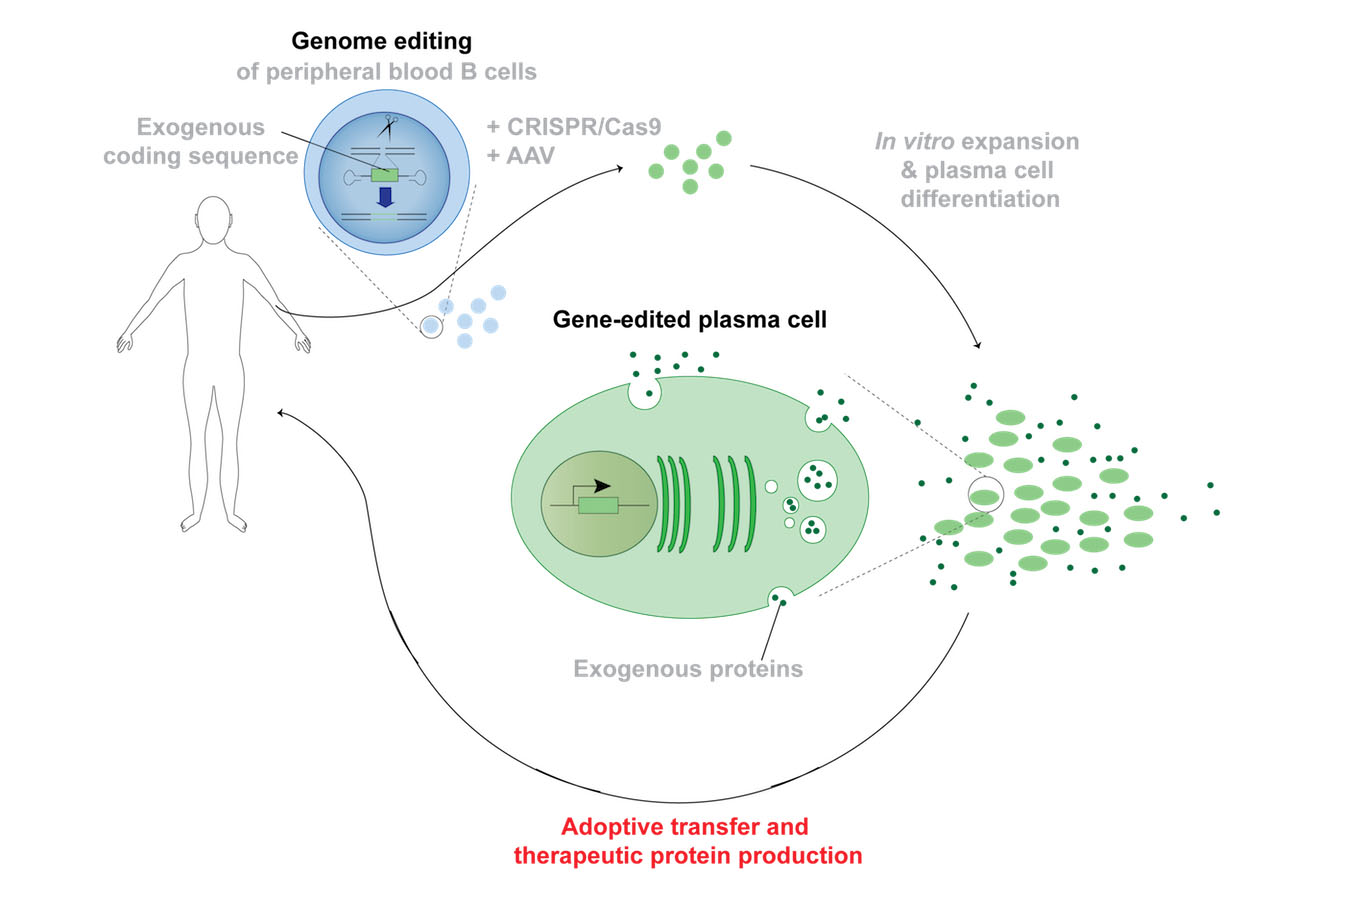 Graphic showing Genome editing and Gene-edited plasma cell